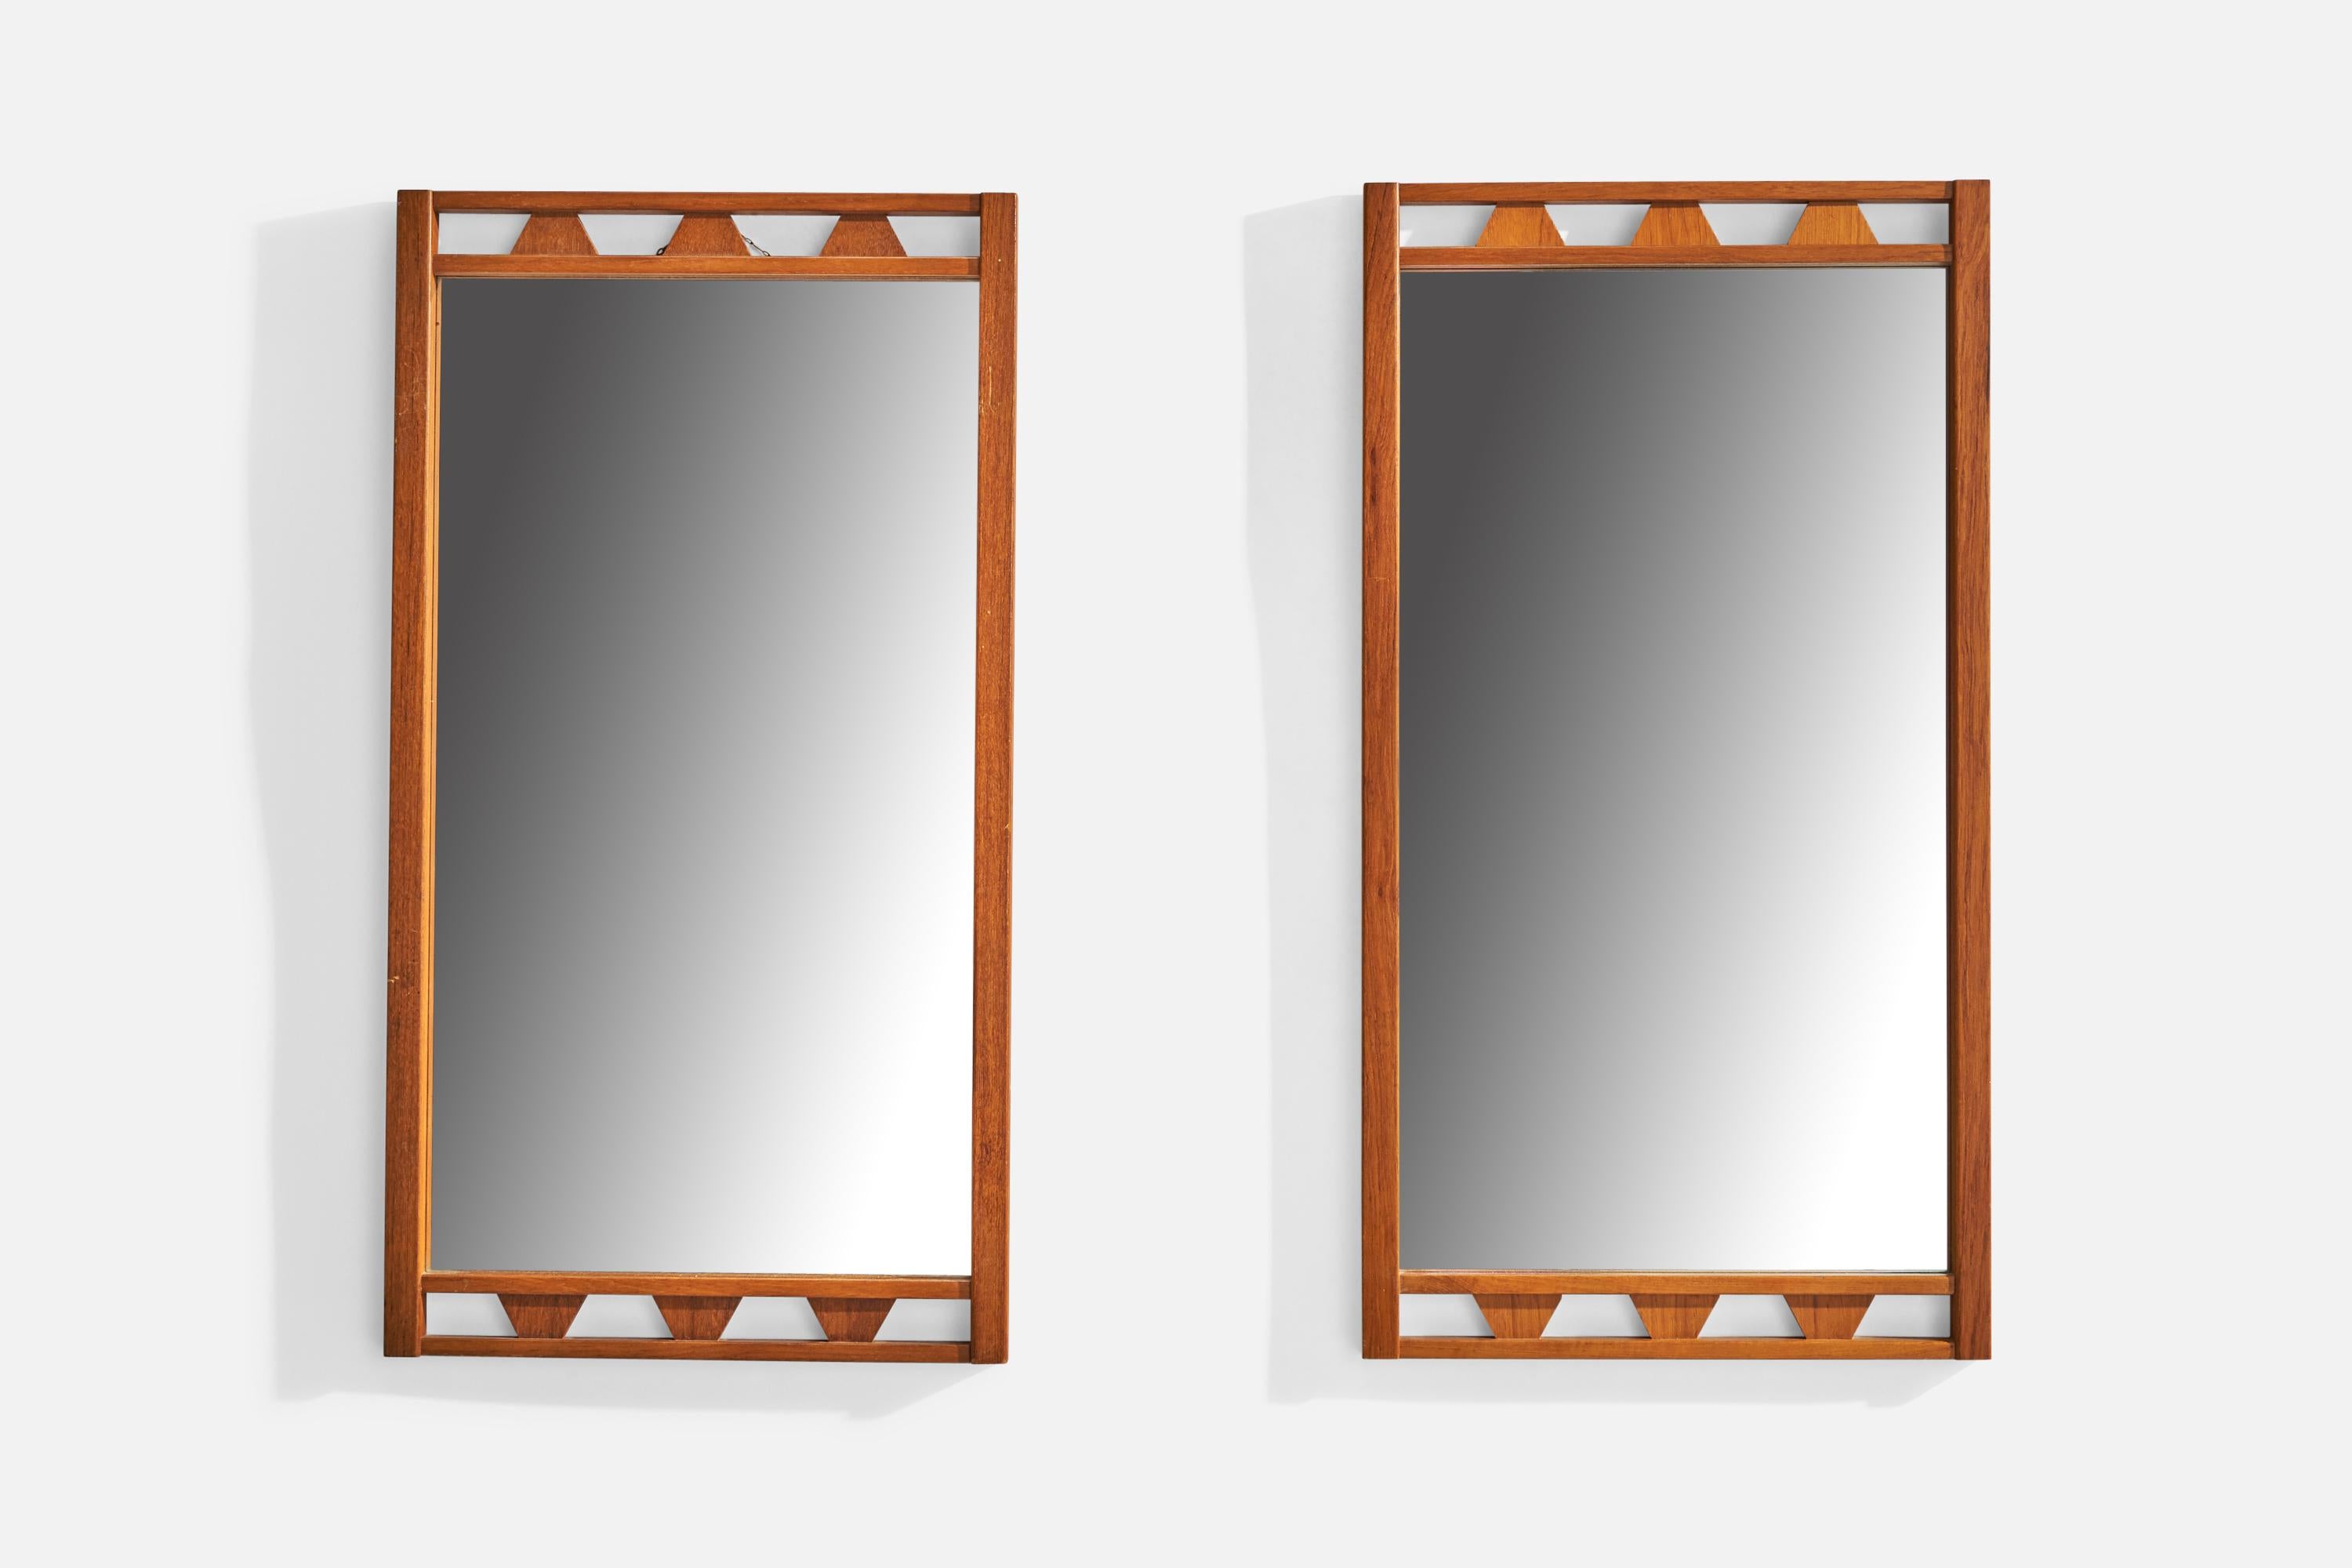 A pair of teak wall mirrors designed and produced in Sweden, c. 1950s.